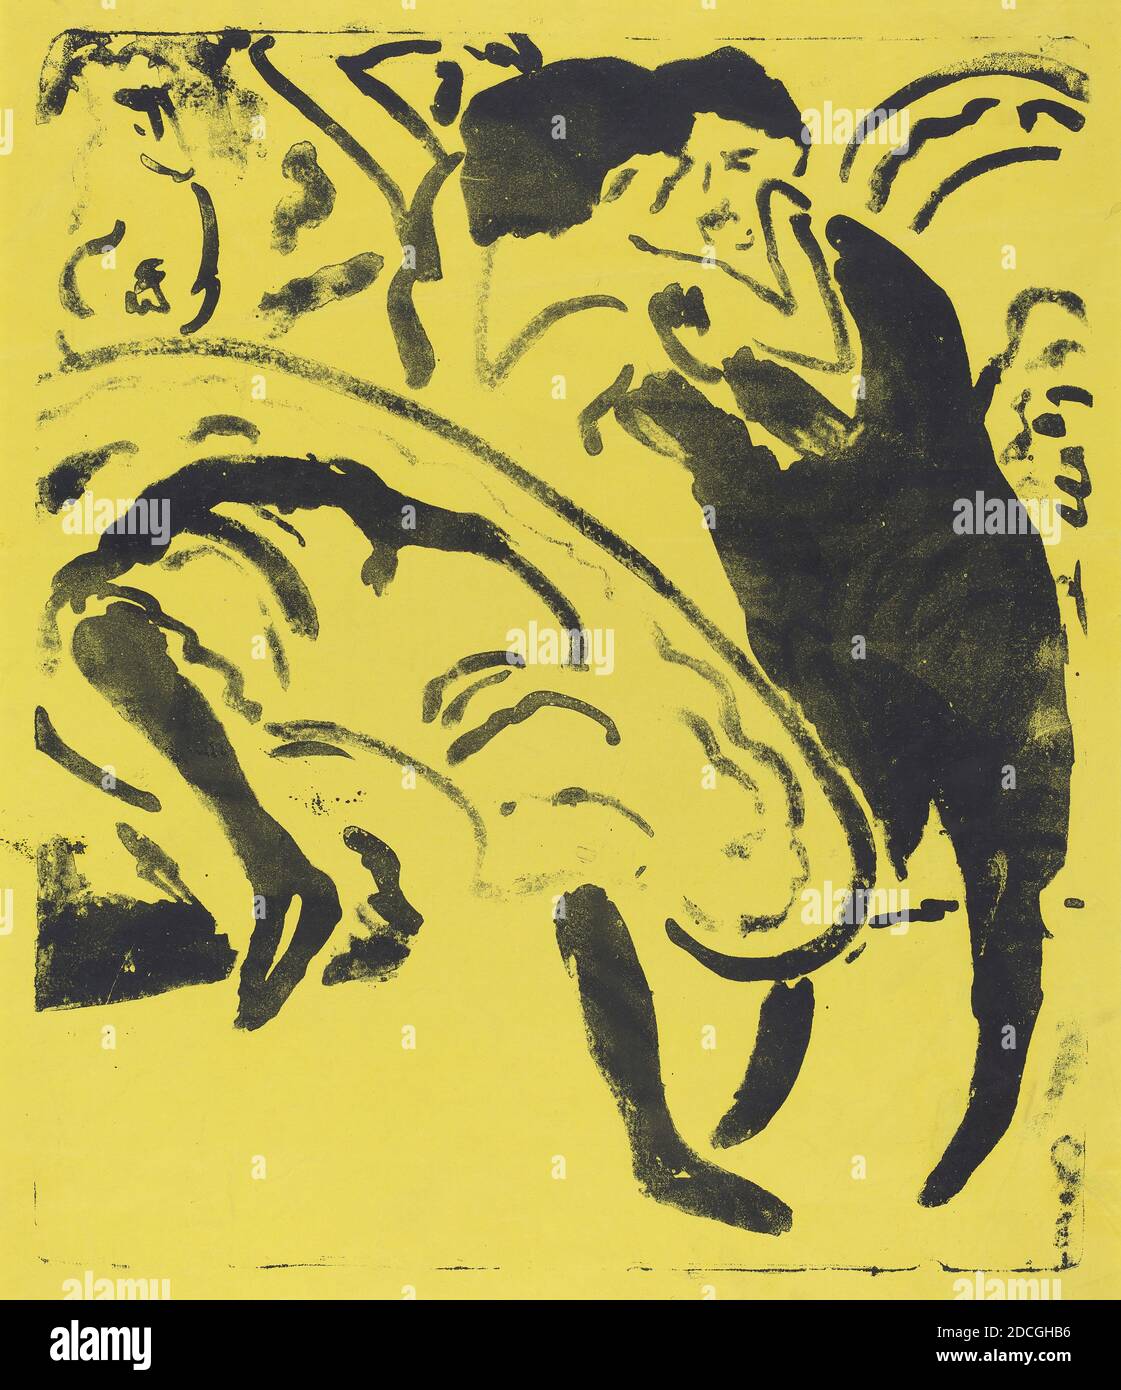 Ernst Ludwig Kirchner, (artist), German, 1880 - 1938, Dancing Couple, 1909, lithograph on yellow wove paper, sheet: 44.6 x 36.8 cm (17 9/16 x 14 1/2 in Stock Photo